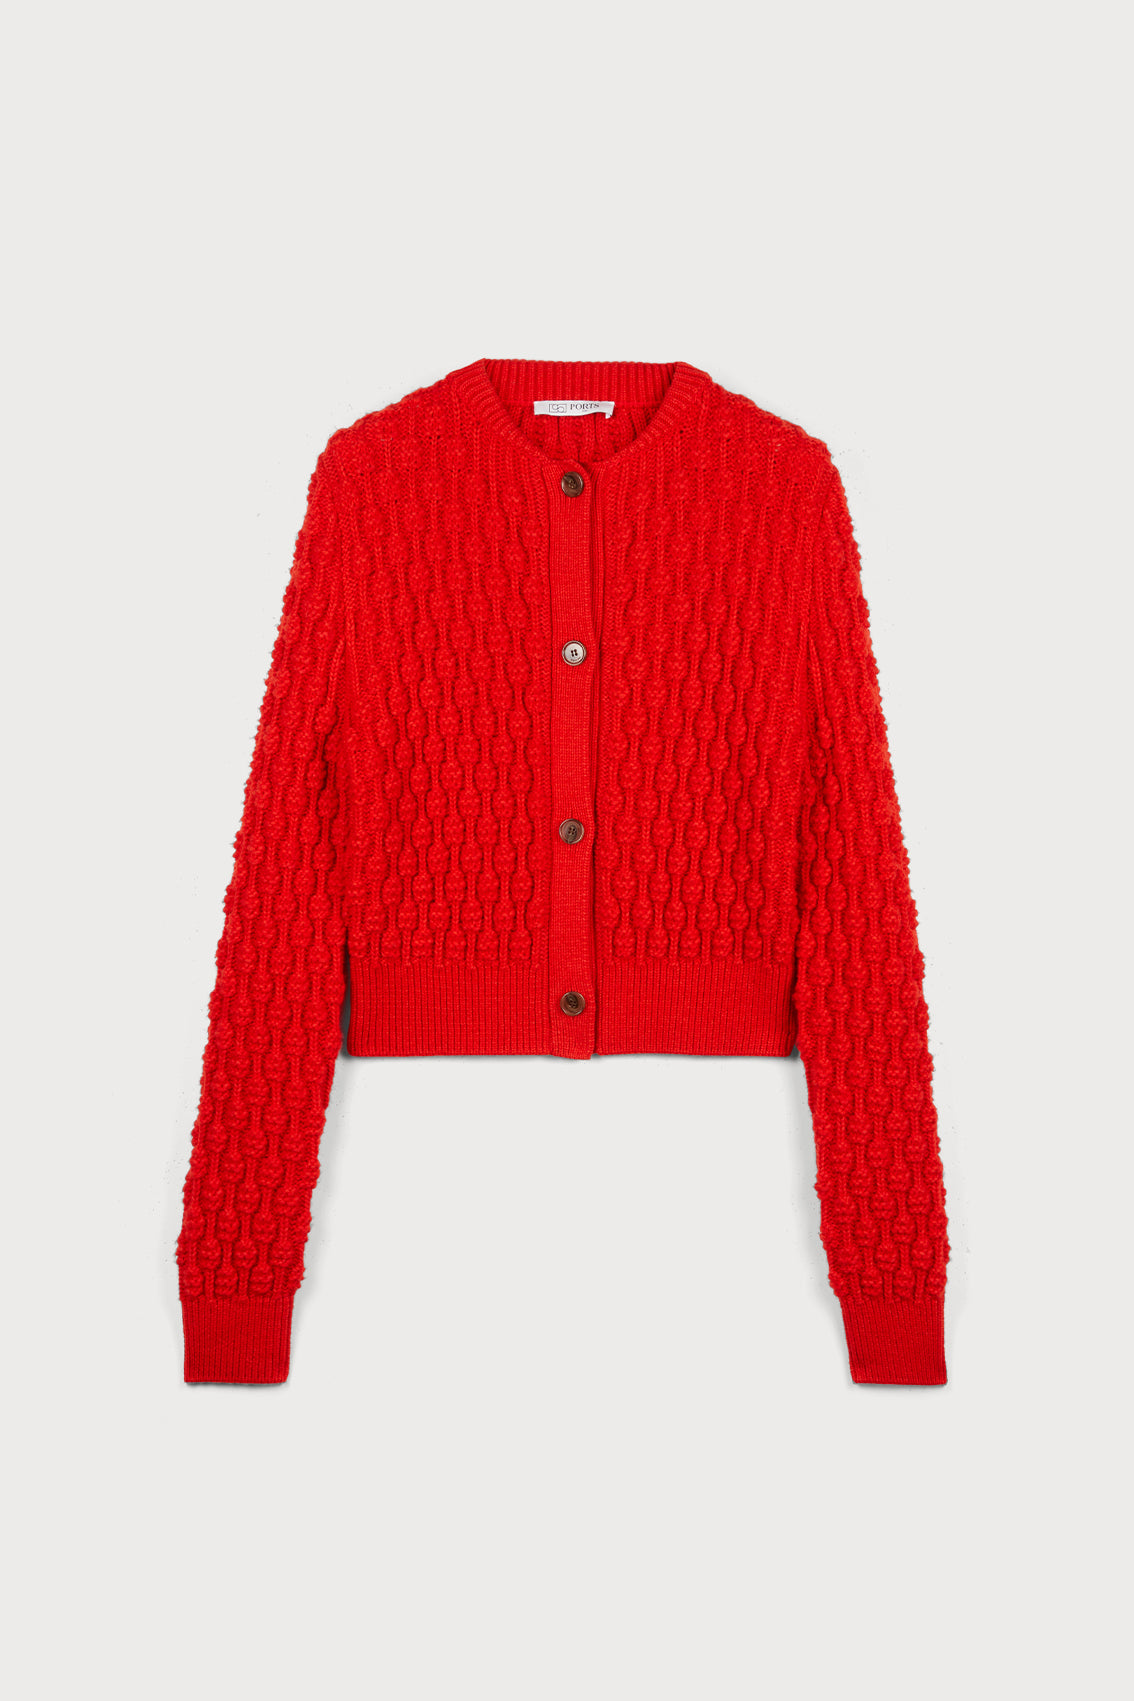 Bubbles Cardigan in Fire Red